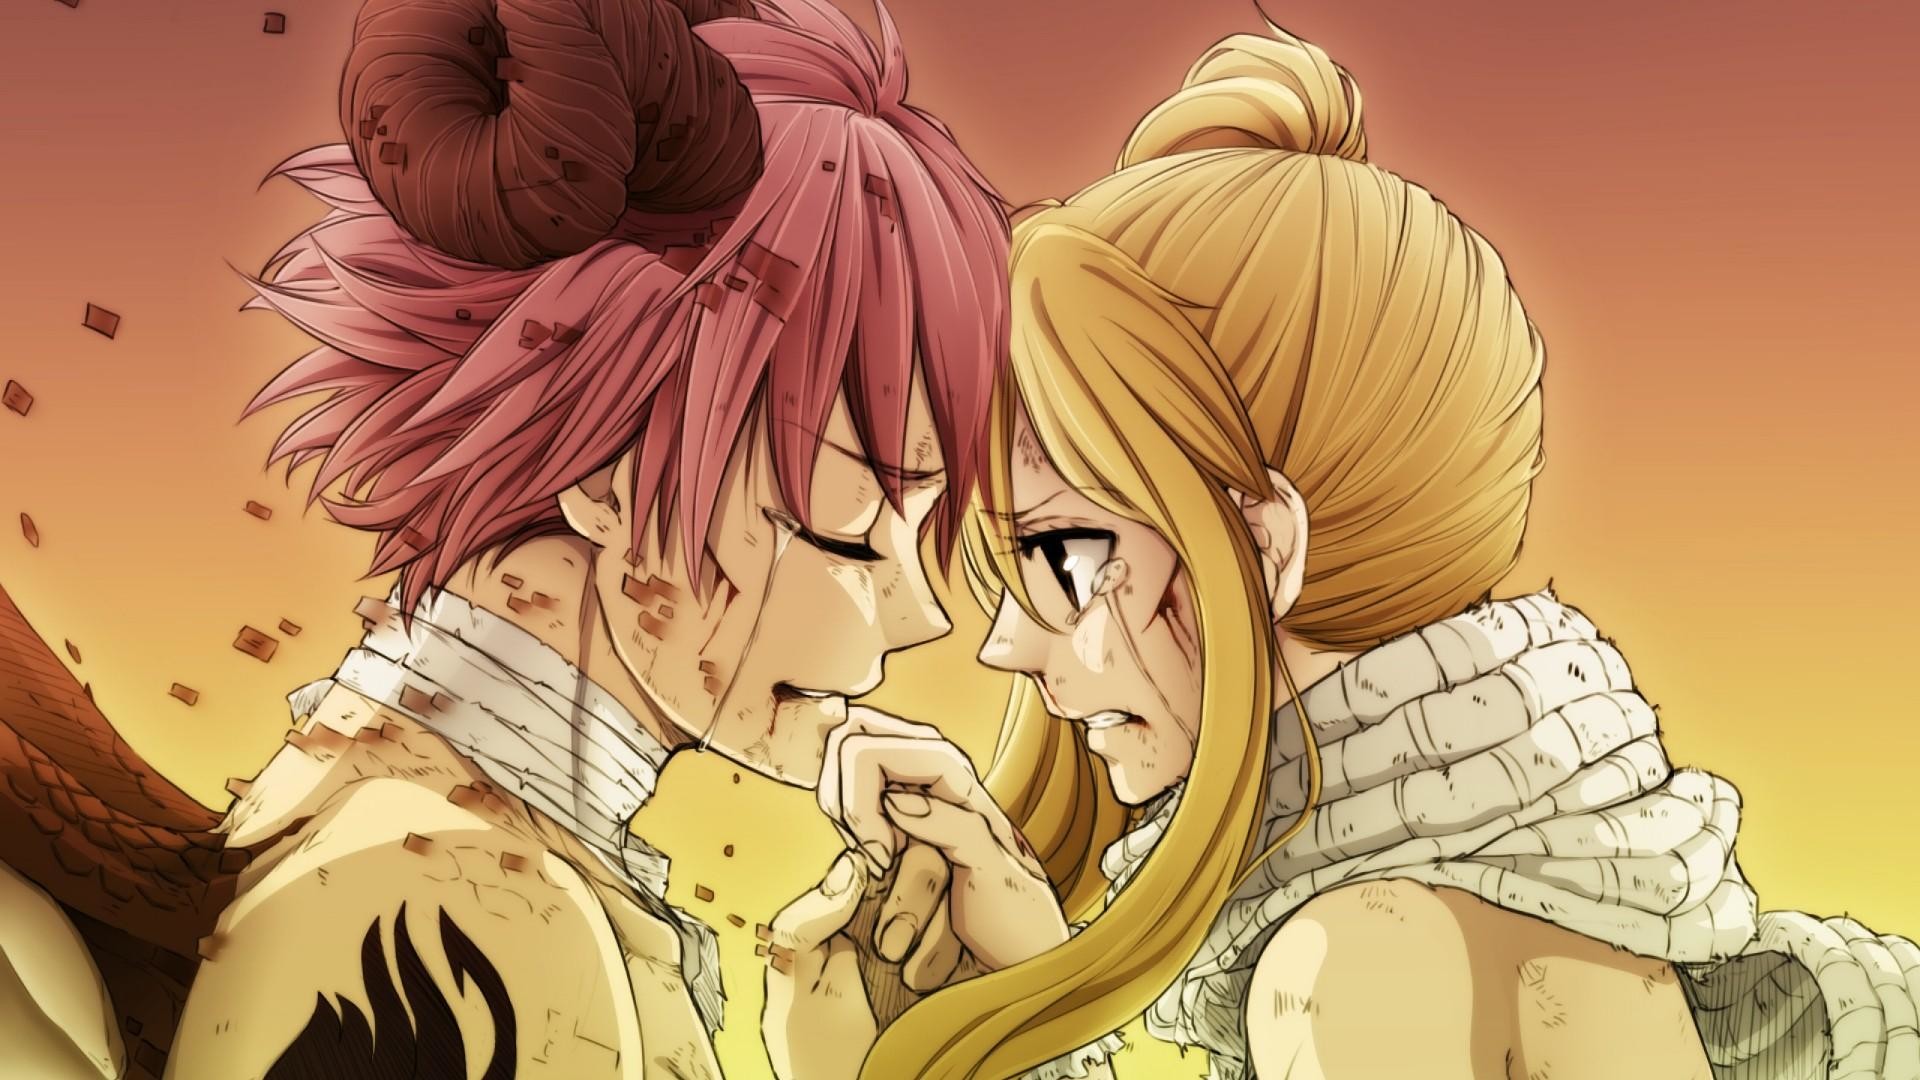 1920x1080 Title. Fairy Tail